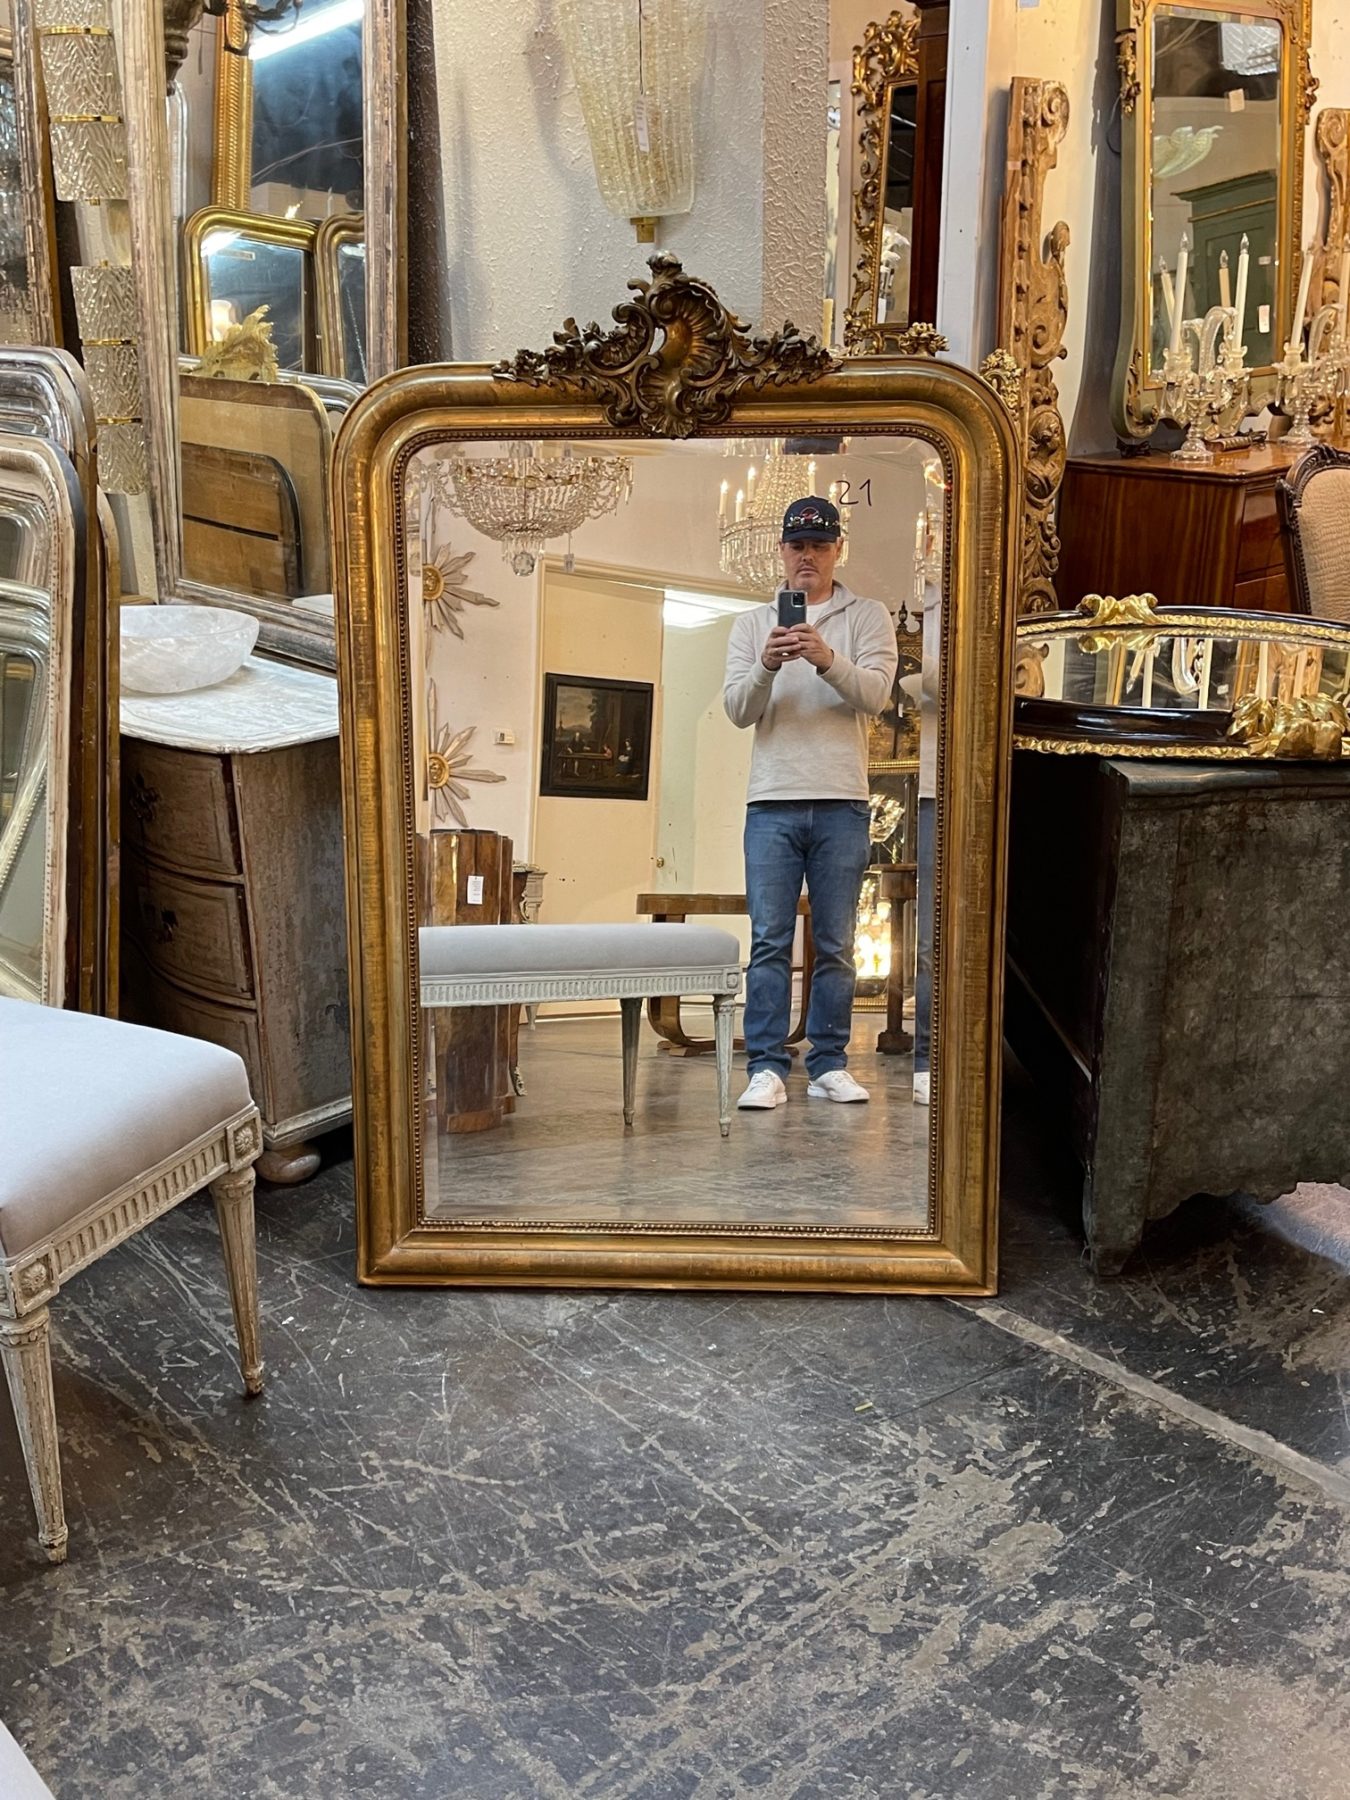 French Louis Philippe Floor Mirror – Legacy Antiques